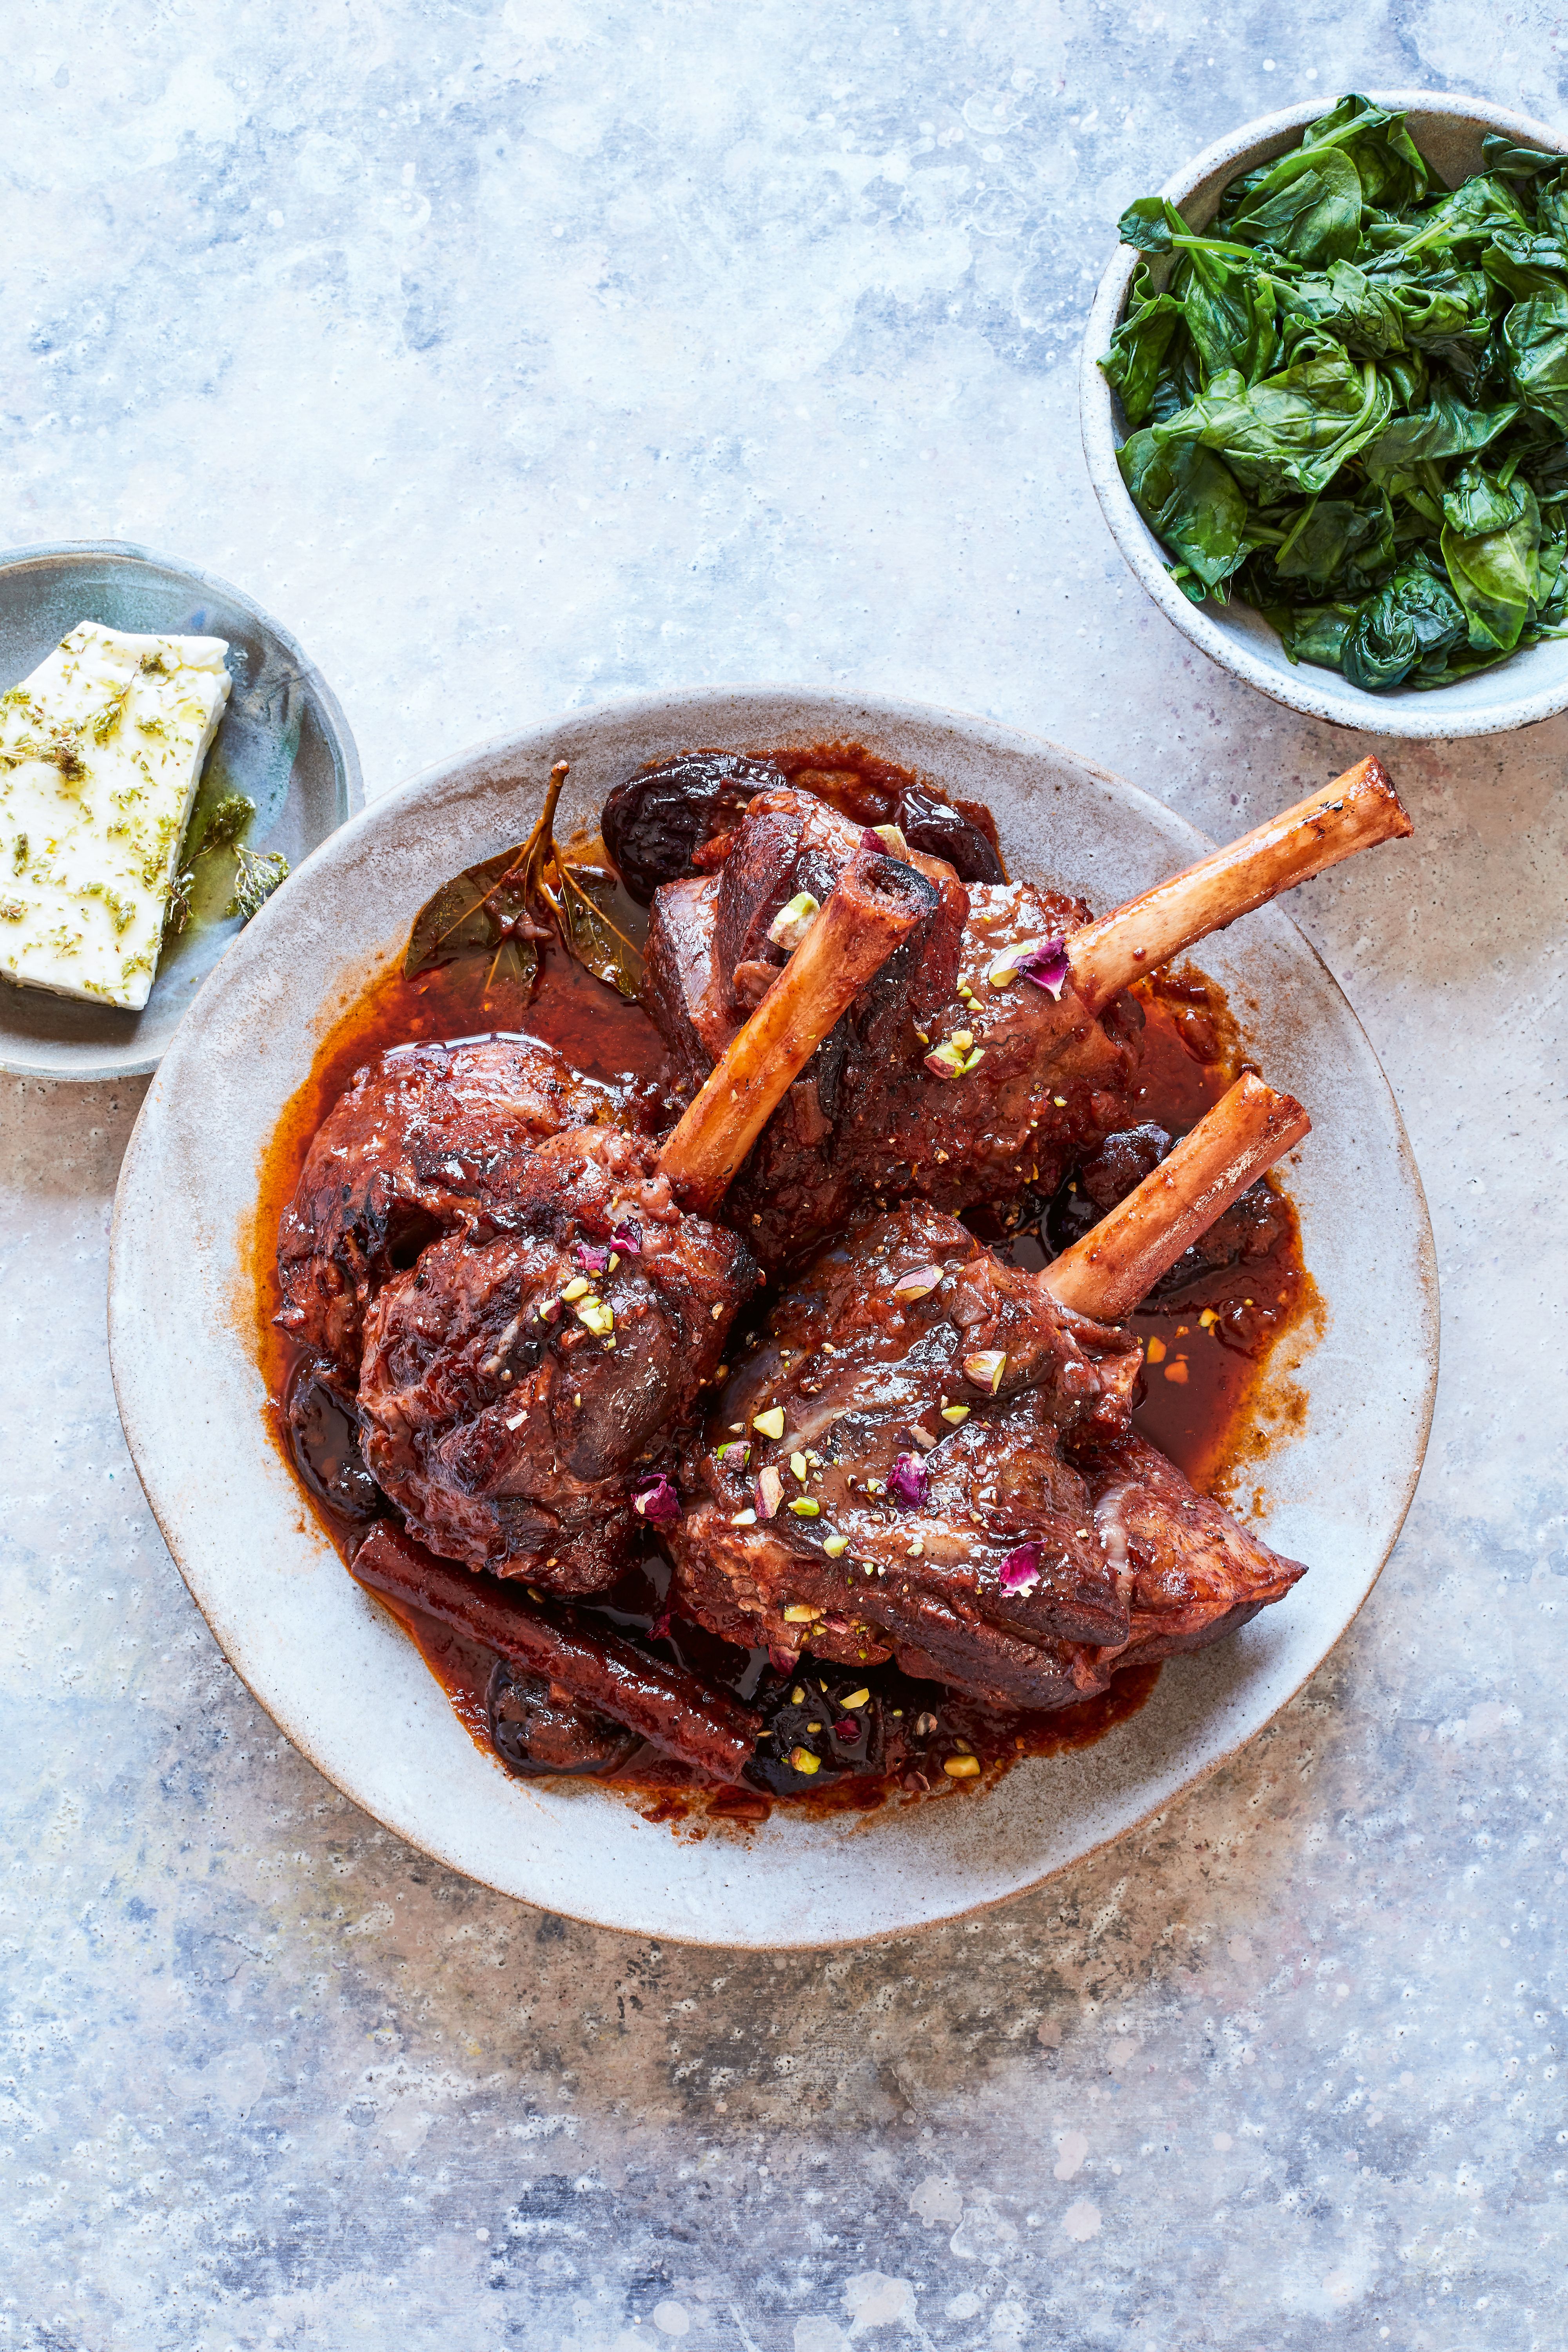 Theo Michaels’ Cypriot lamb shanks in sticky sauce